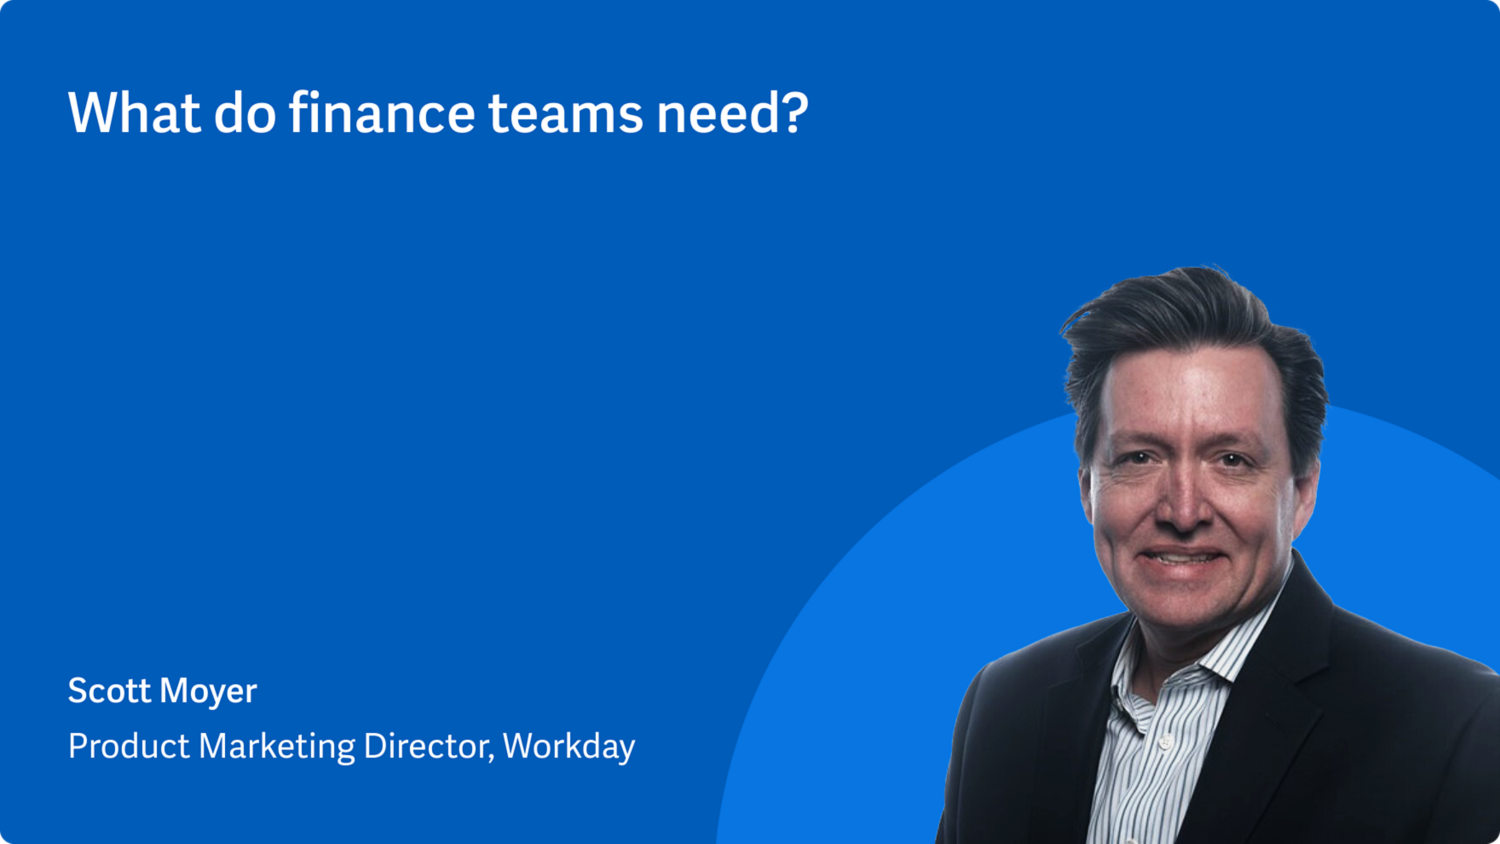 Workday's Product Marketing Director Scott Moyer talks about finance solutions